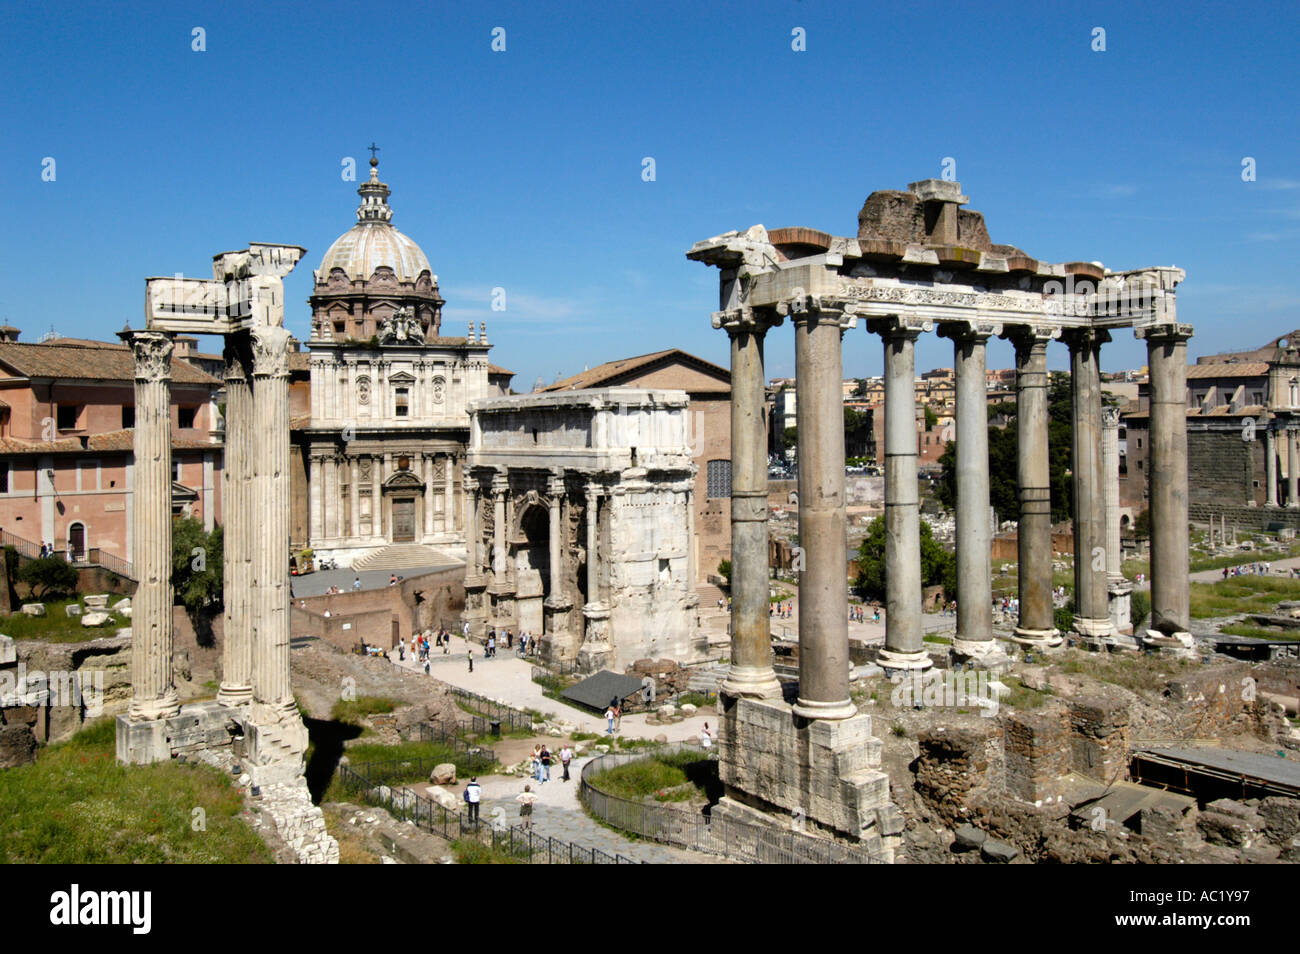 The Temple of Saturn and the Arch of Septimus Severus in the Roman Forum, Rome, Italy Stock Photo